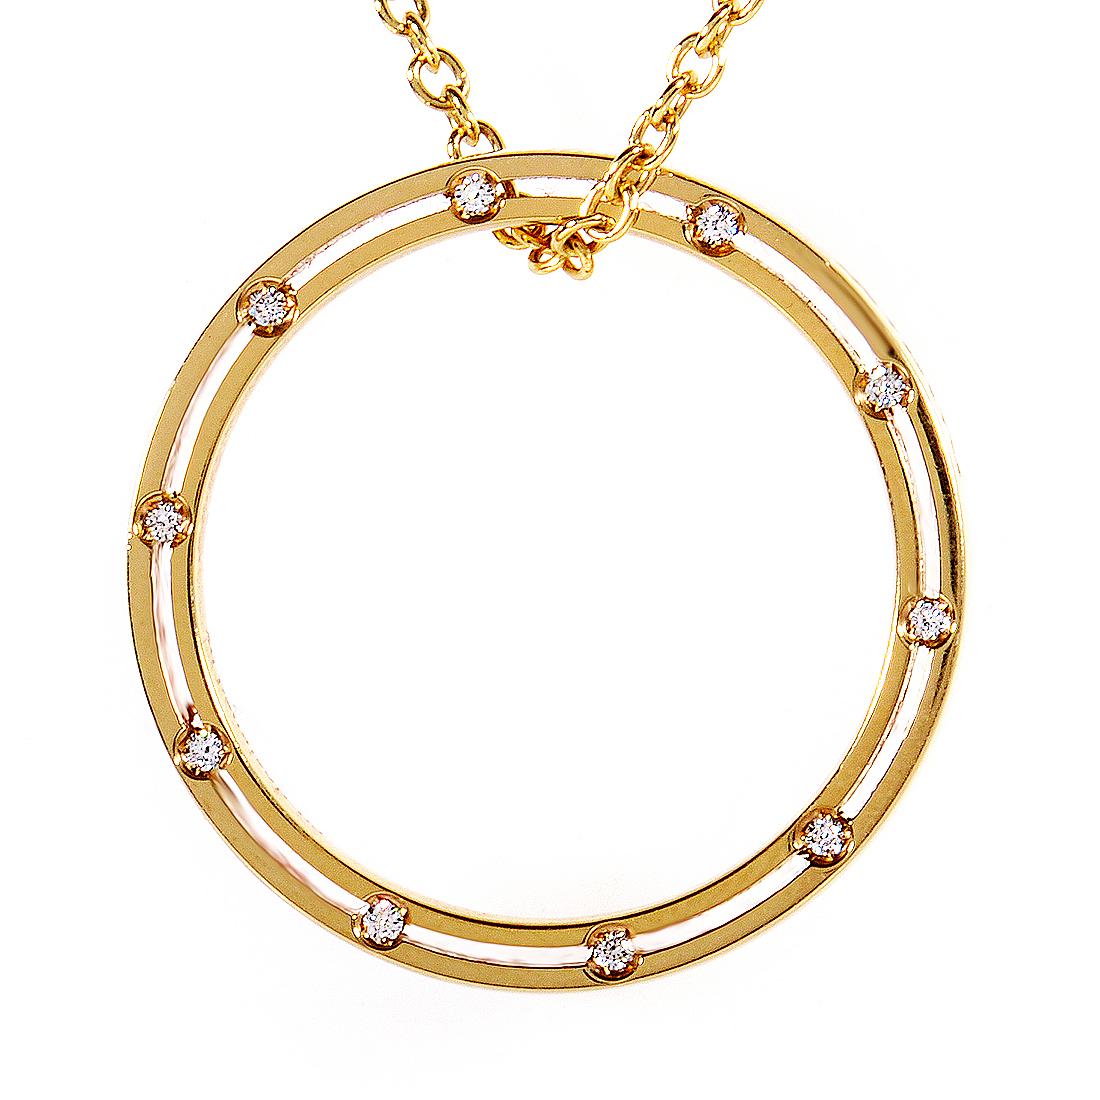 This pendant necklace designed by Brad Pitt and Damiani has a tasteful design that sparkles with elegance. The pendant necklace is made of 18K yellow gold and boasts a ring studded with ~.18ct of diamonds. This piece would pair wonderfully with many